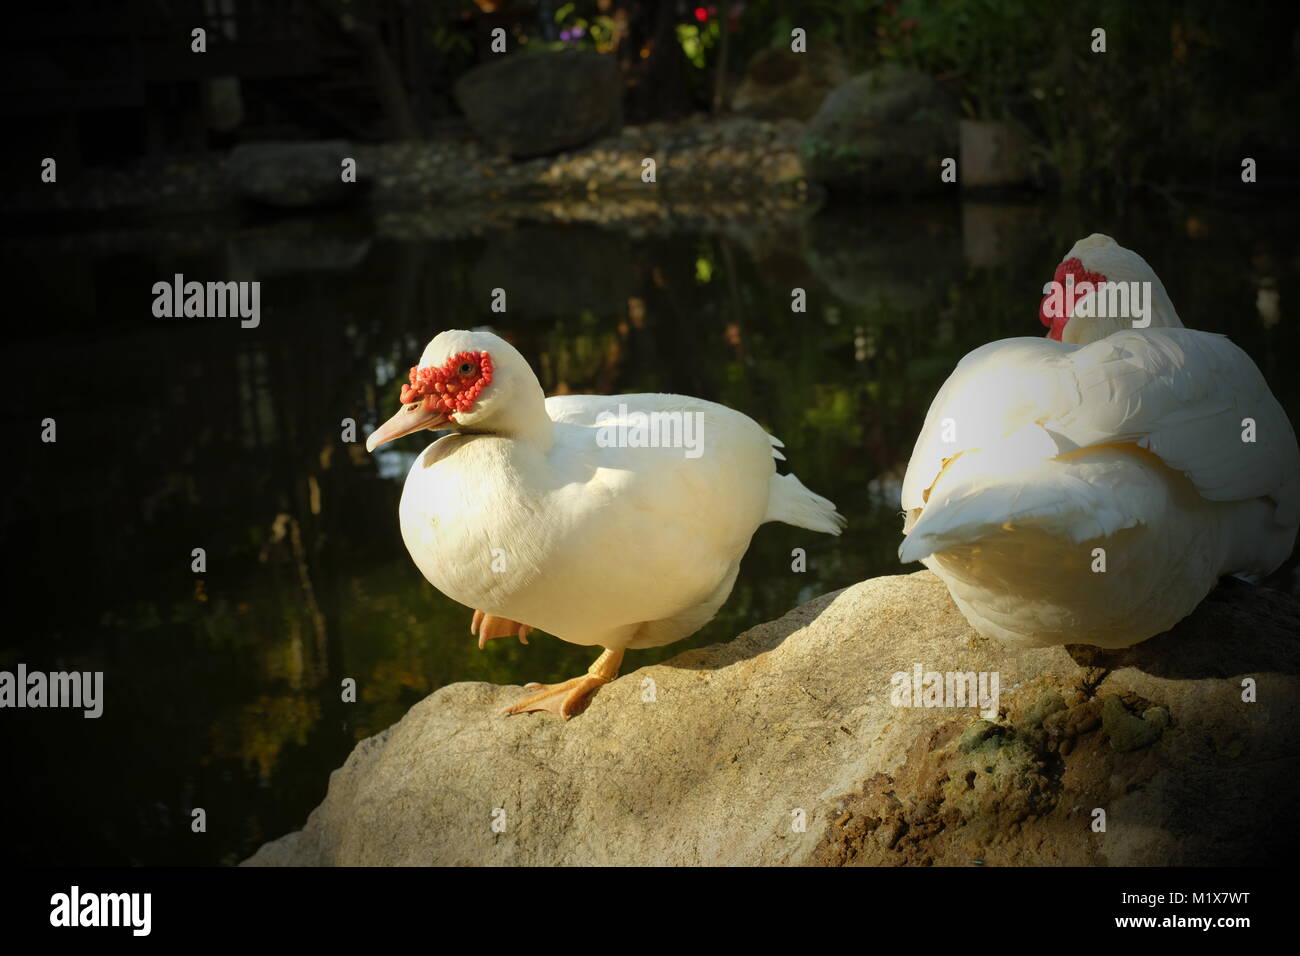 A pair of pet geese in Chiang Mai, Thailand. Stock Photo